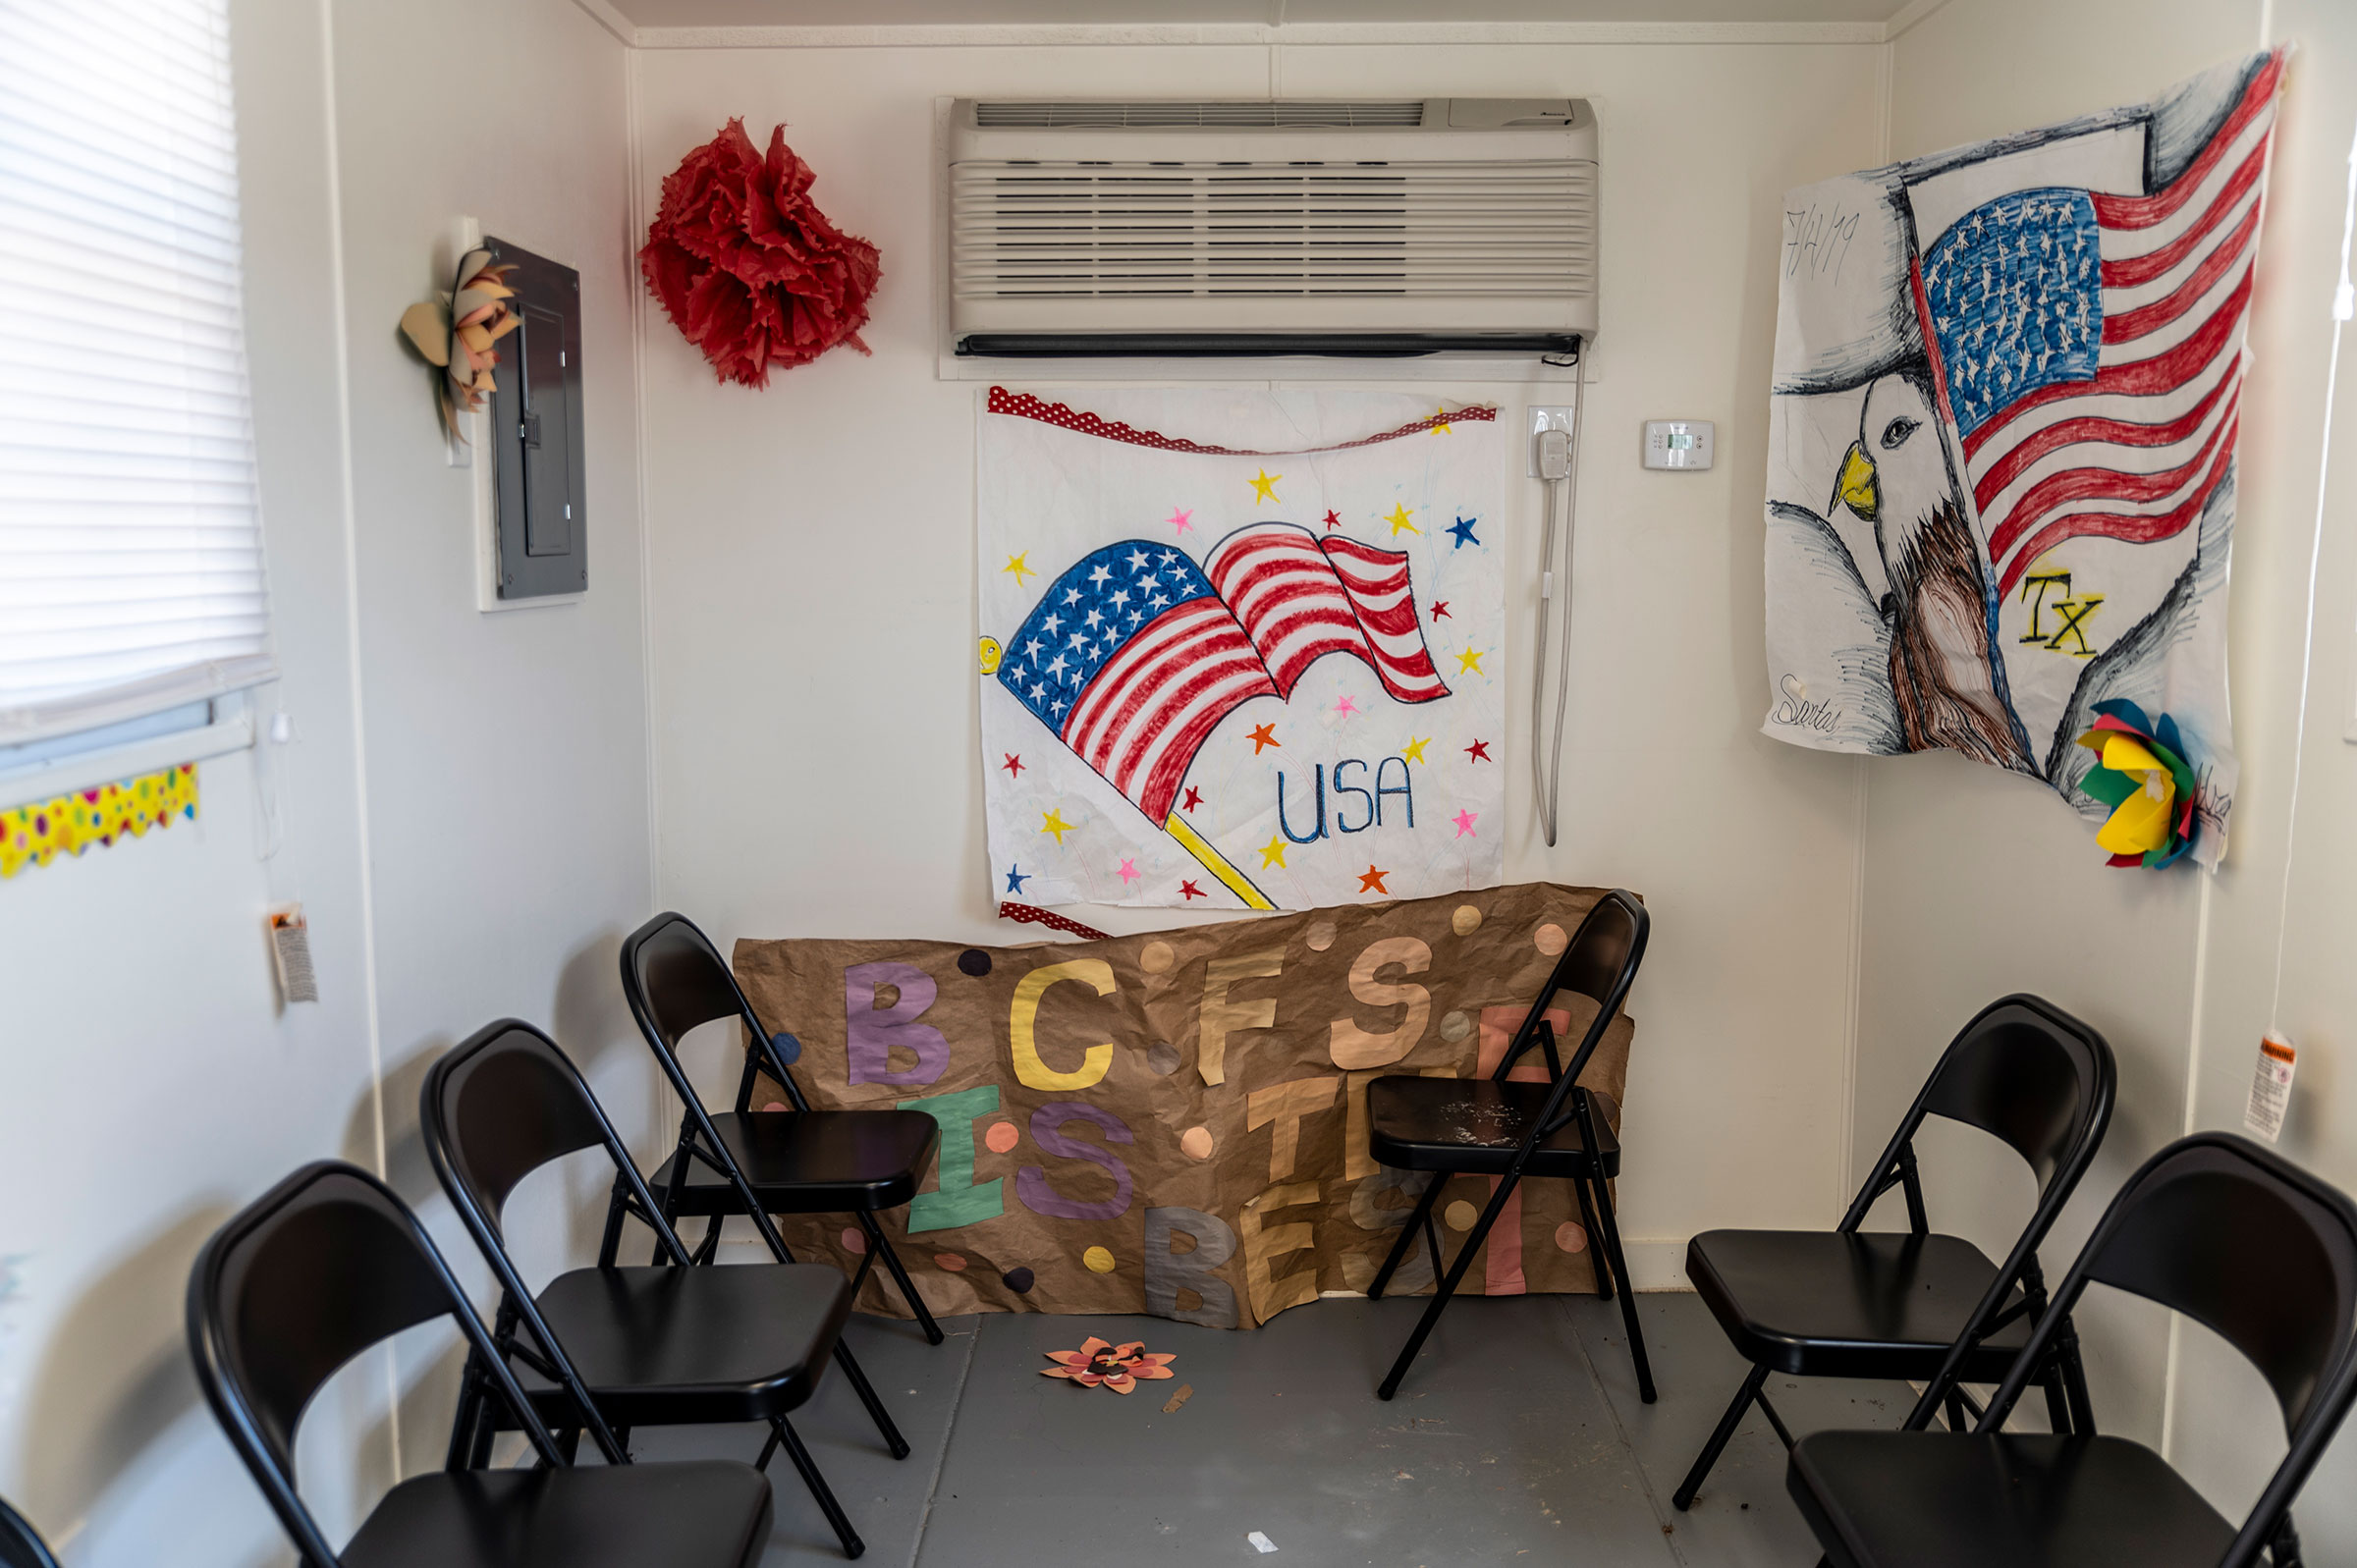 Artwork made by previous residents hangs inside a welcome center at a Influx Care Facility for unaccompanied children in Carrizo Springs, TX  on Feb. 21, 2021. (Sergio Flores—The Washington Post/Getty Images)